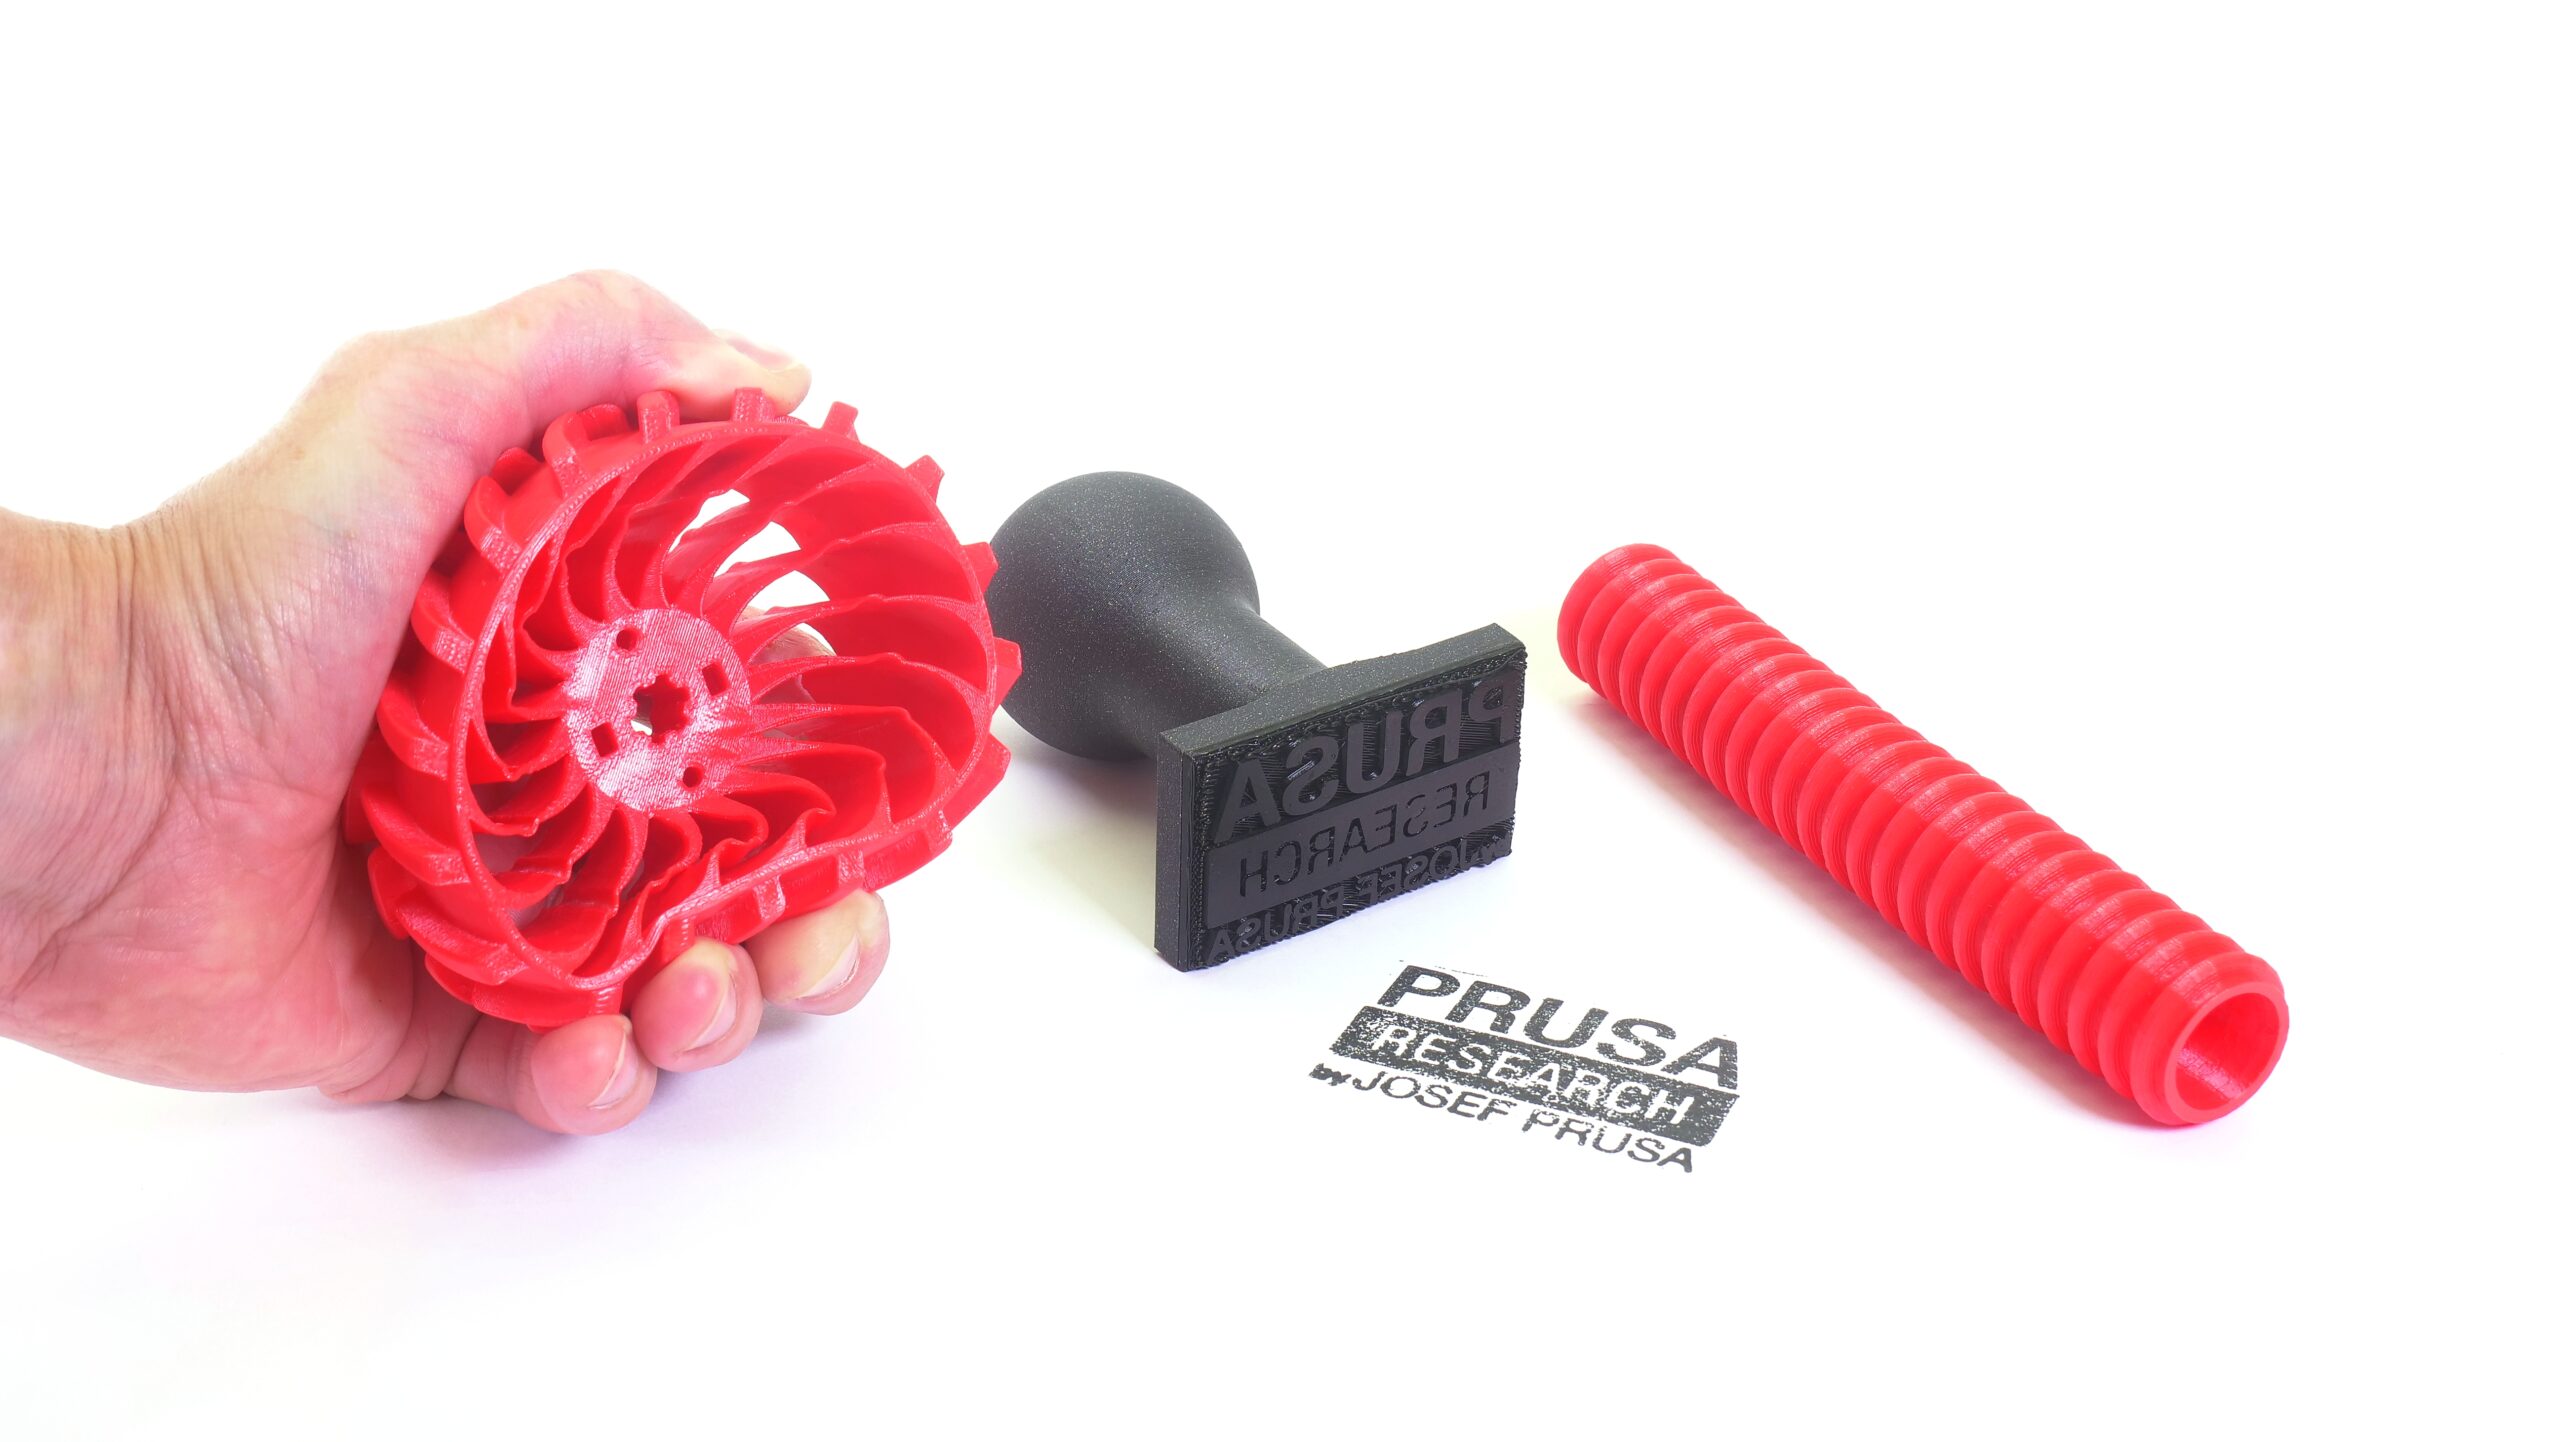 TPU - Resilient and flexible rubber-like filament